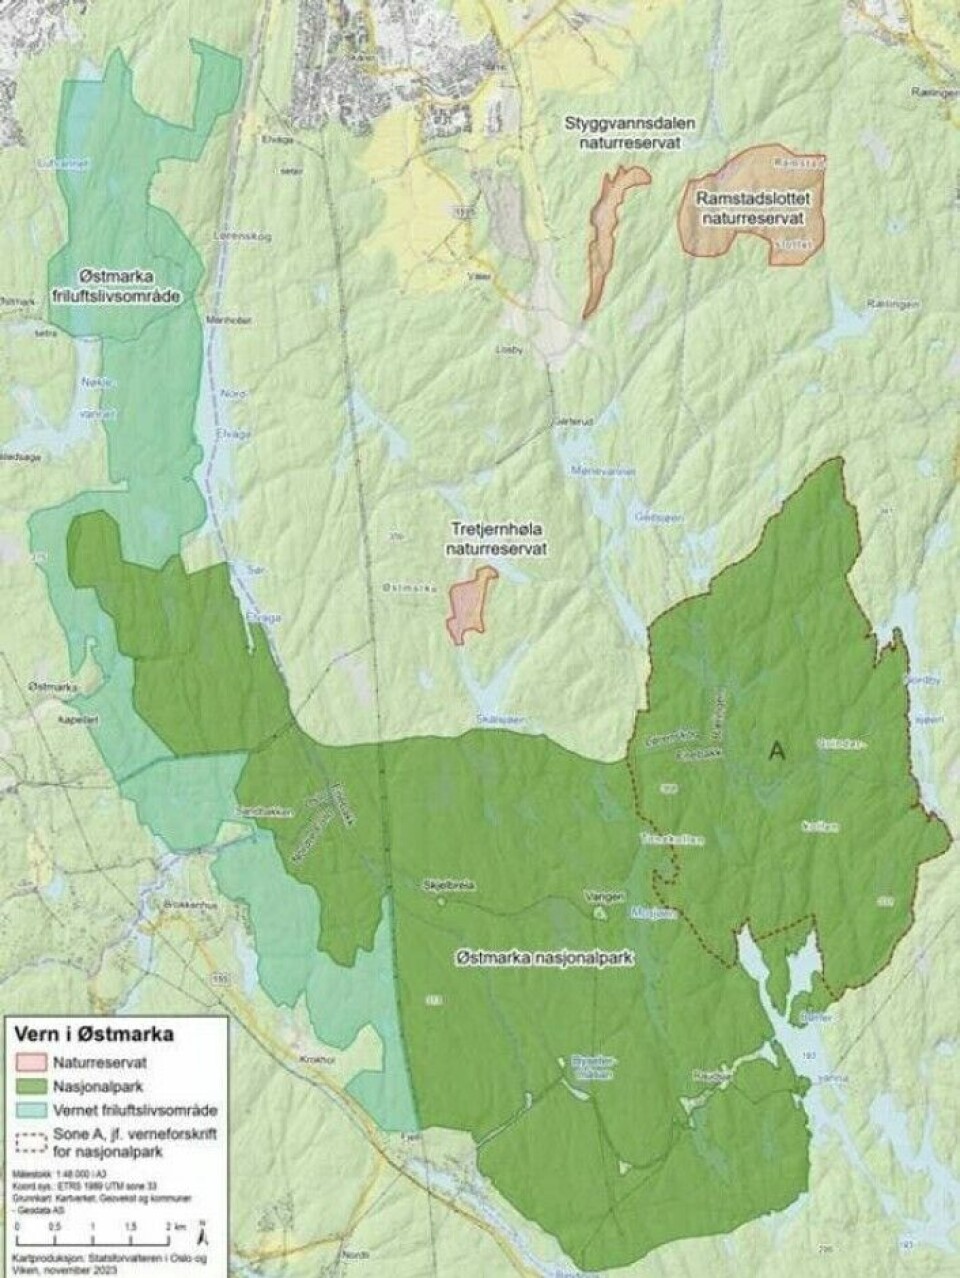 In the heart of the new Østmarka National Park (dark green) lies the popular Vangen ski lodge. The light green area is the new outdoor recreation area, where protection will not be as strict. Oppsal and Bøler in Oslo can be seen in the upper left. At the lower right is Børtervanna in Enebakk. In the southwest, the area is bordered by Enebakkveien (national highway 155). At the top of the map is Lørenskog.